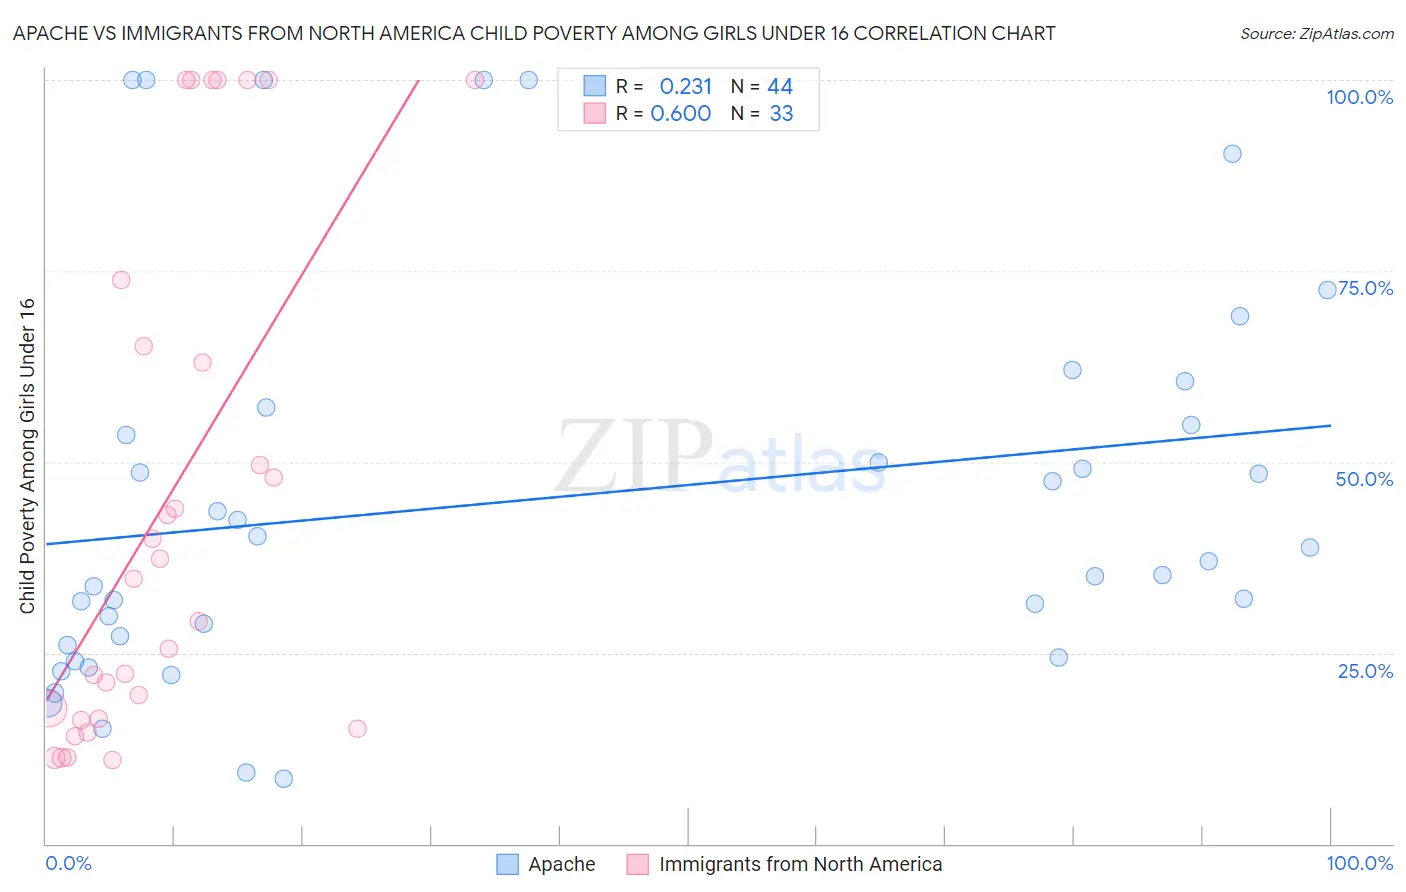 Apache vs Immigrants from North America Child Poverty Among Girls Under 16